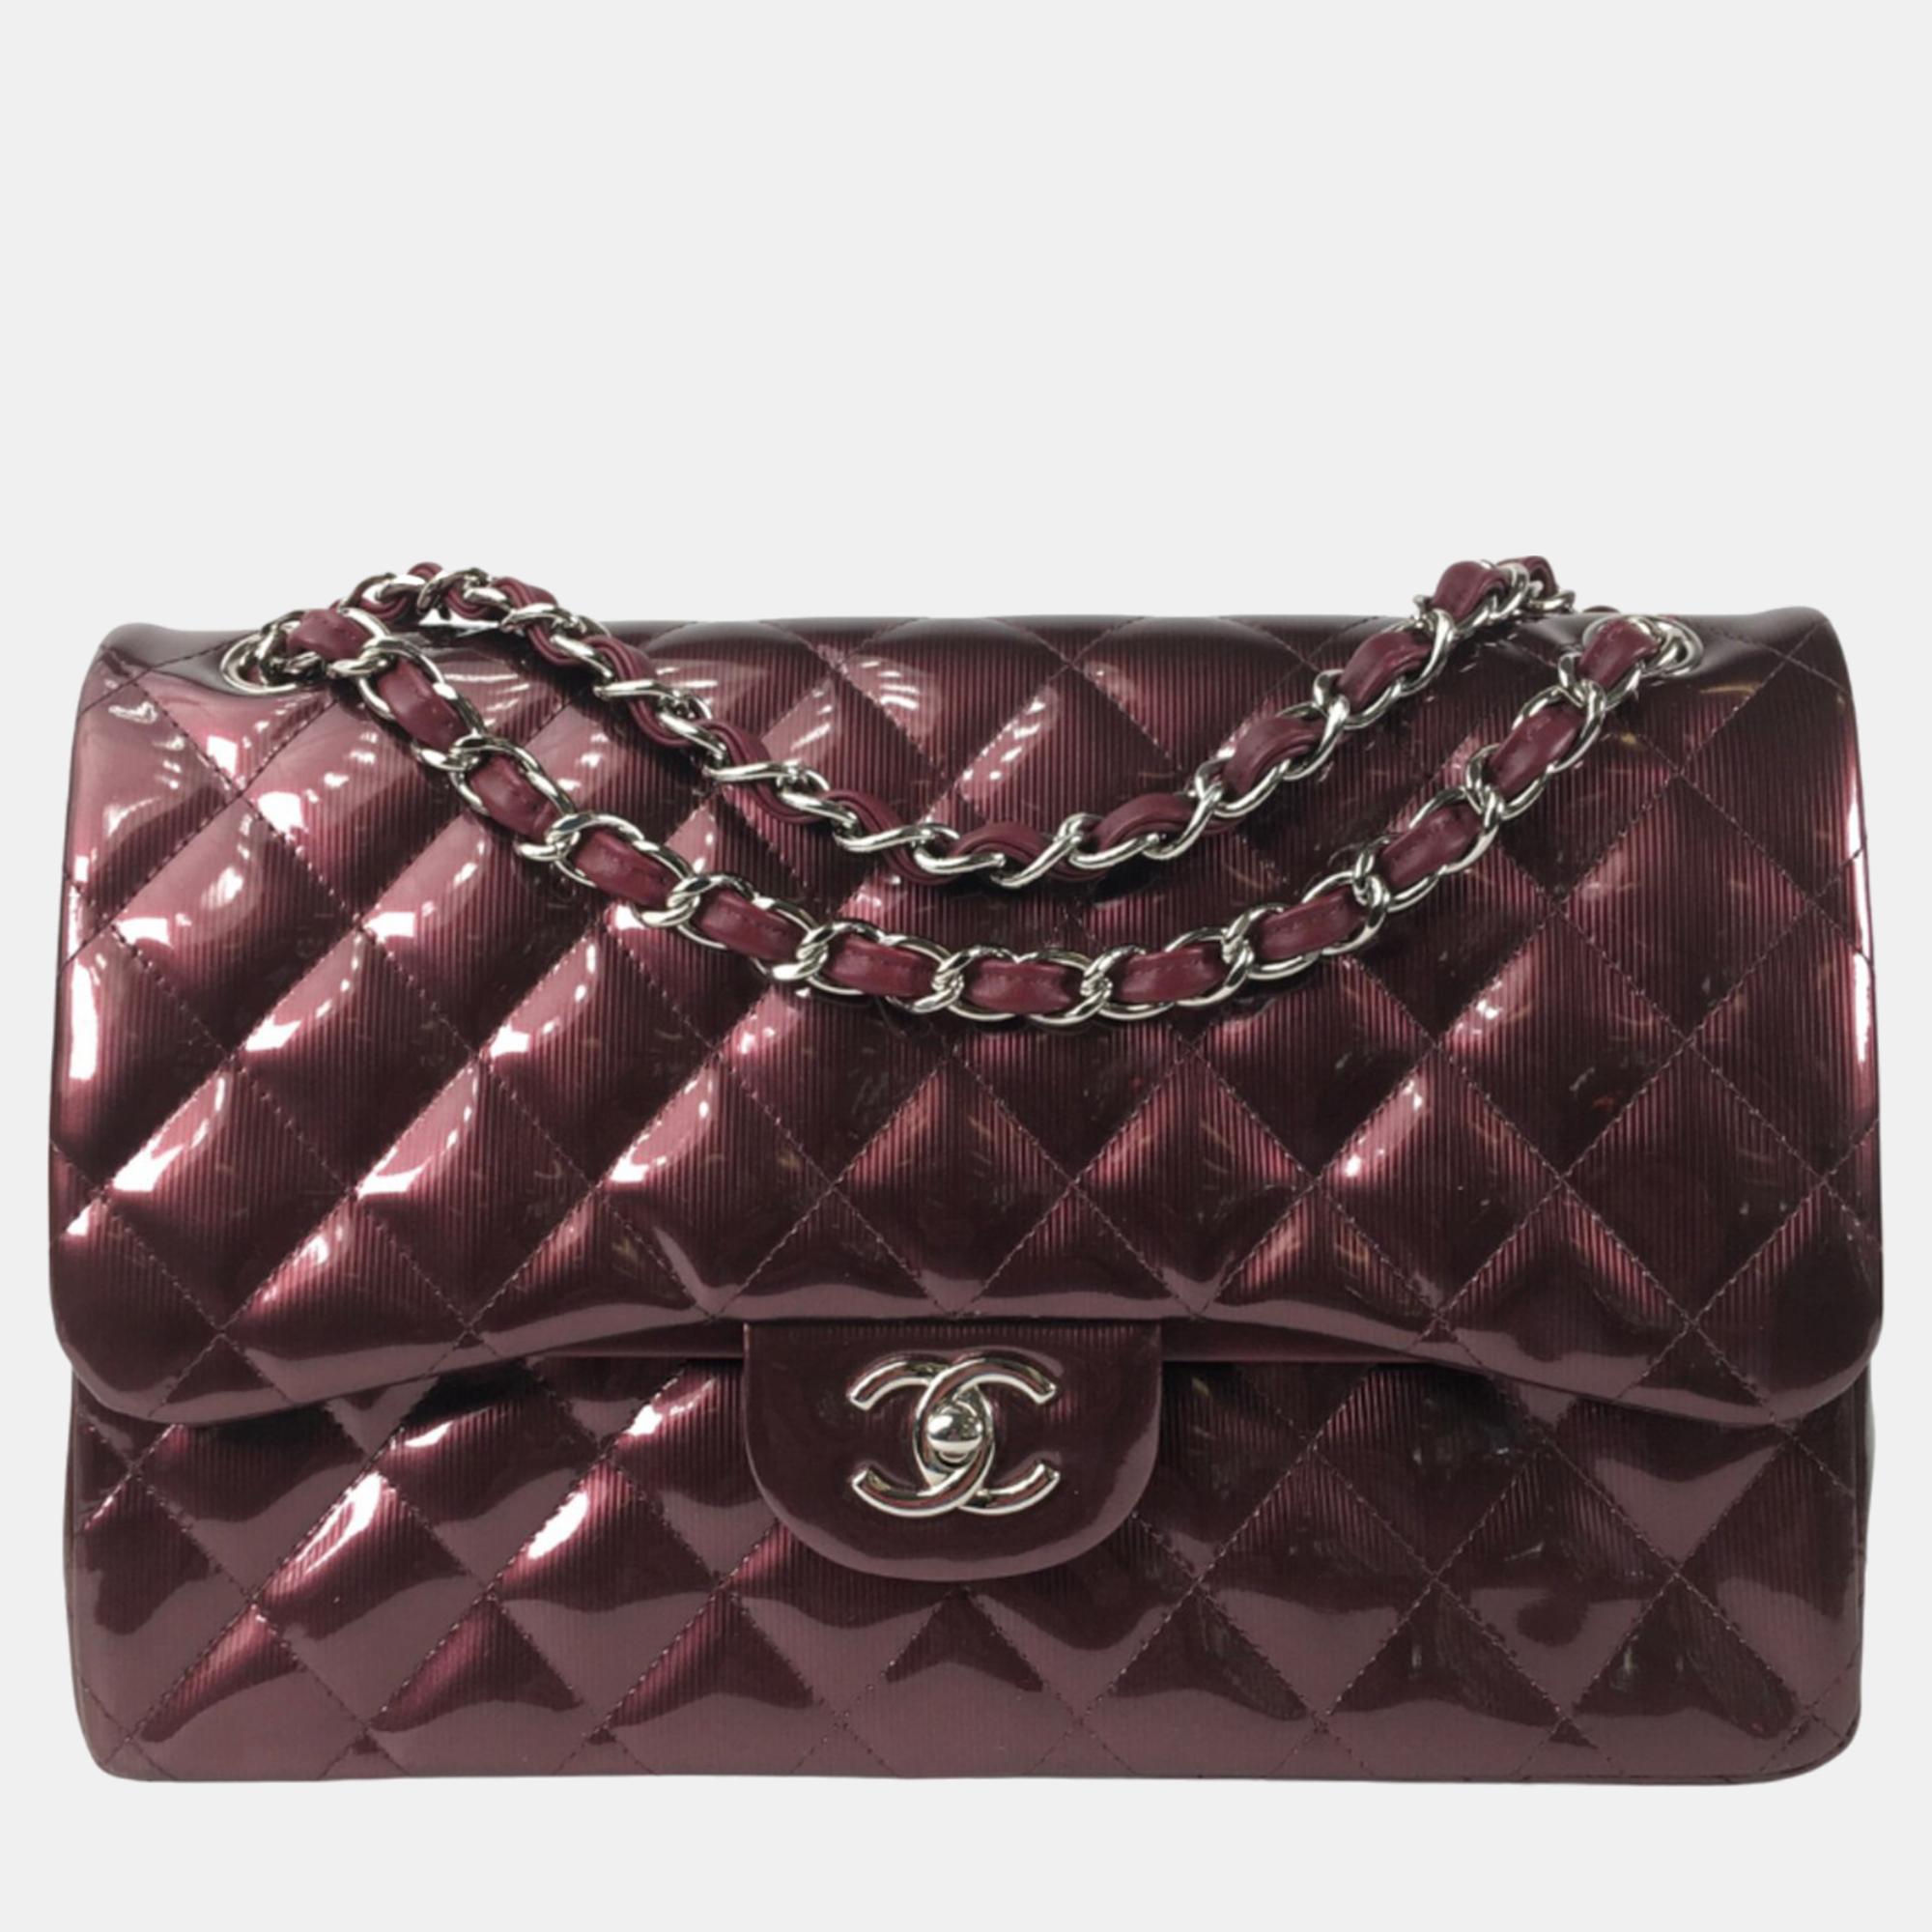 Chanel red jumbo classic patent double flap